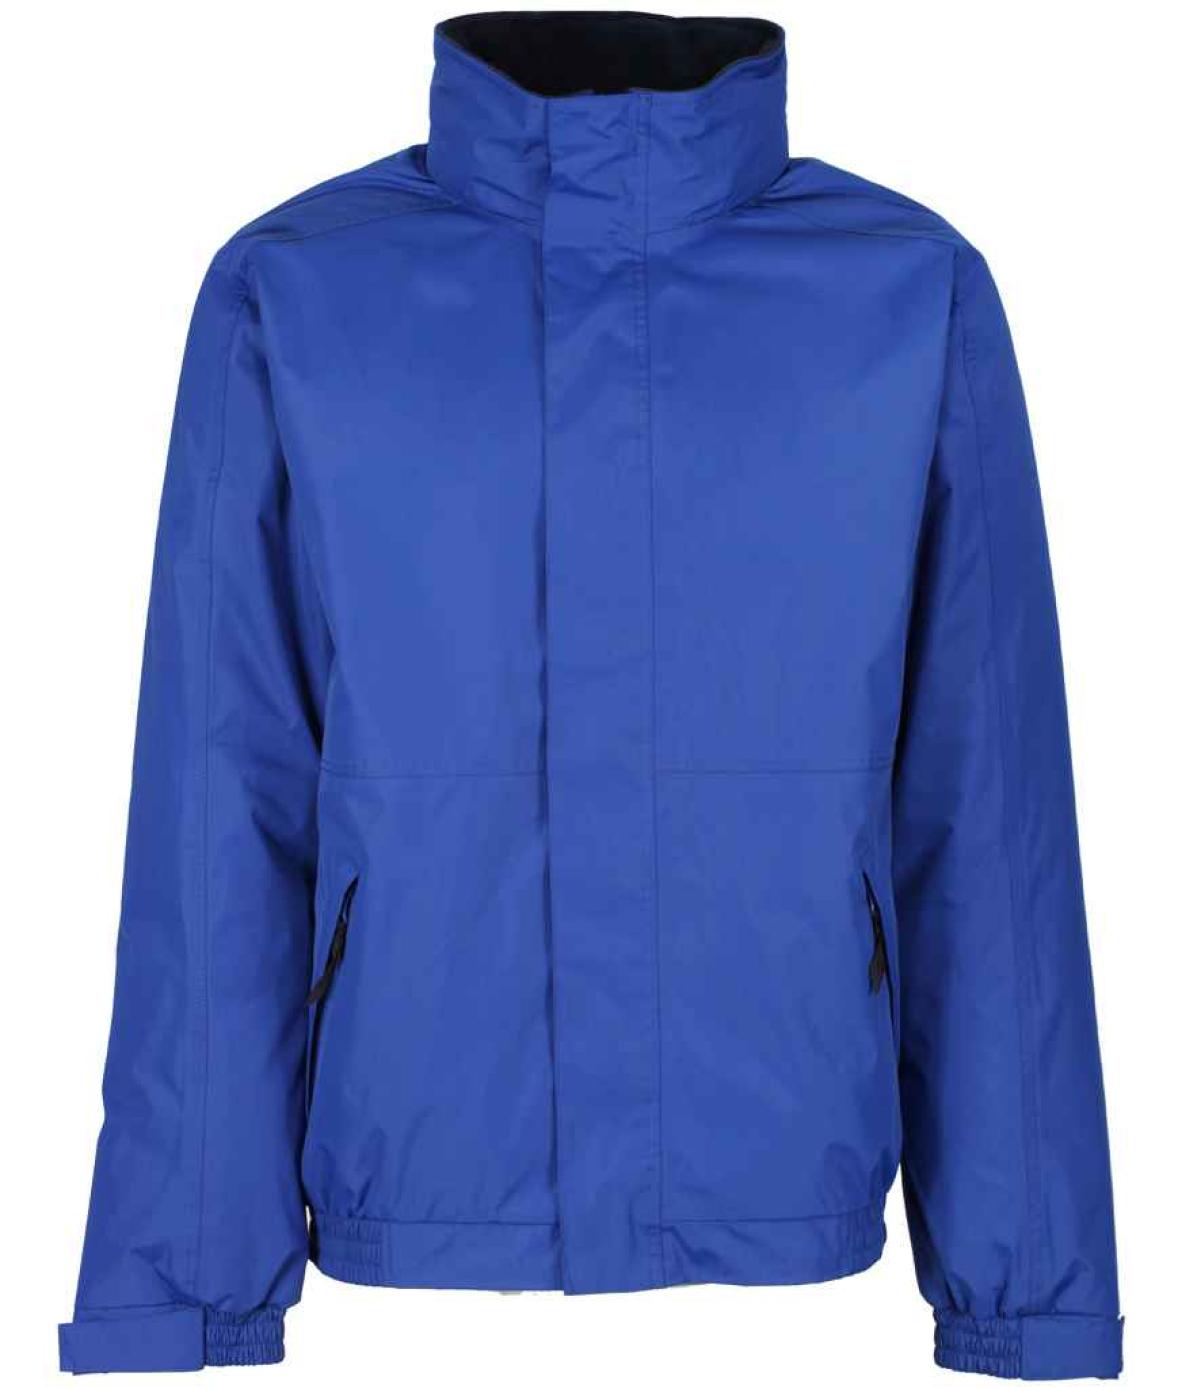 Regatta Dover Waterproof Insulated Jacket - New Royal Blue | Order ...